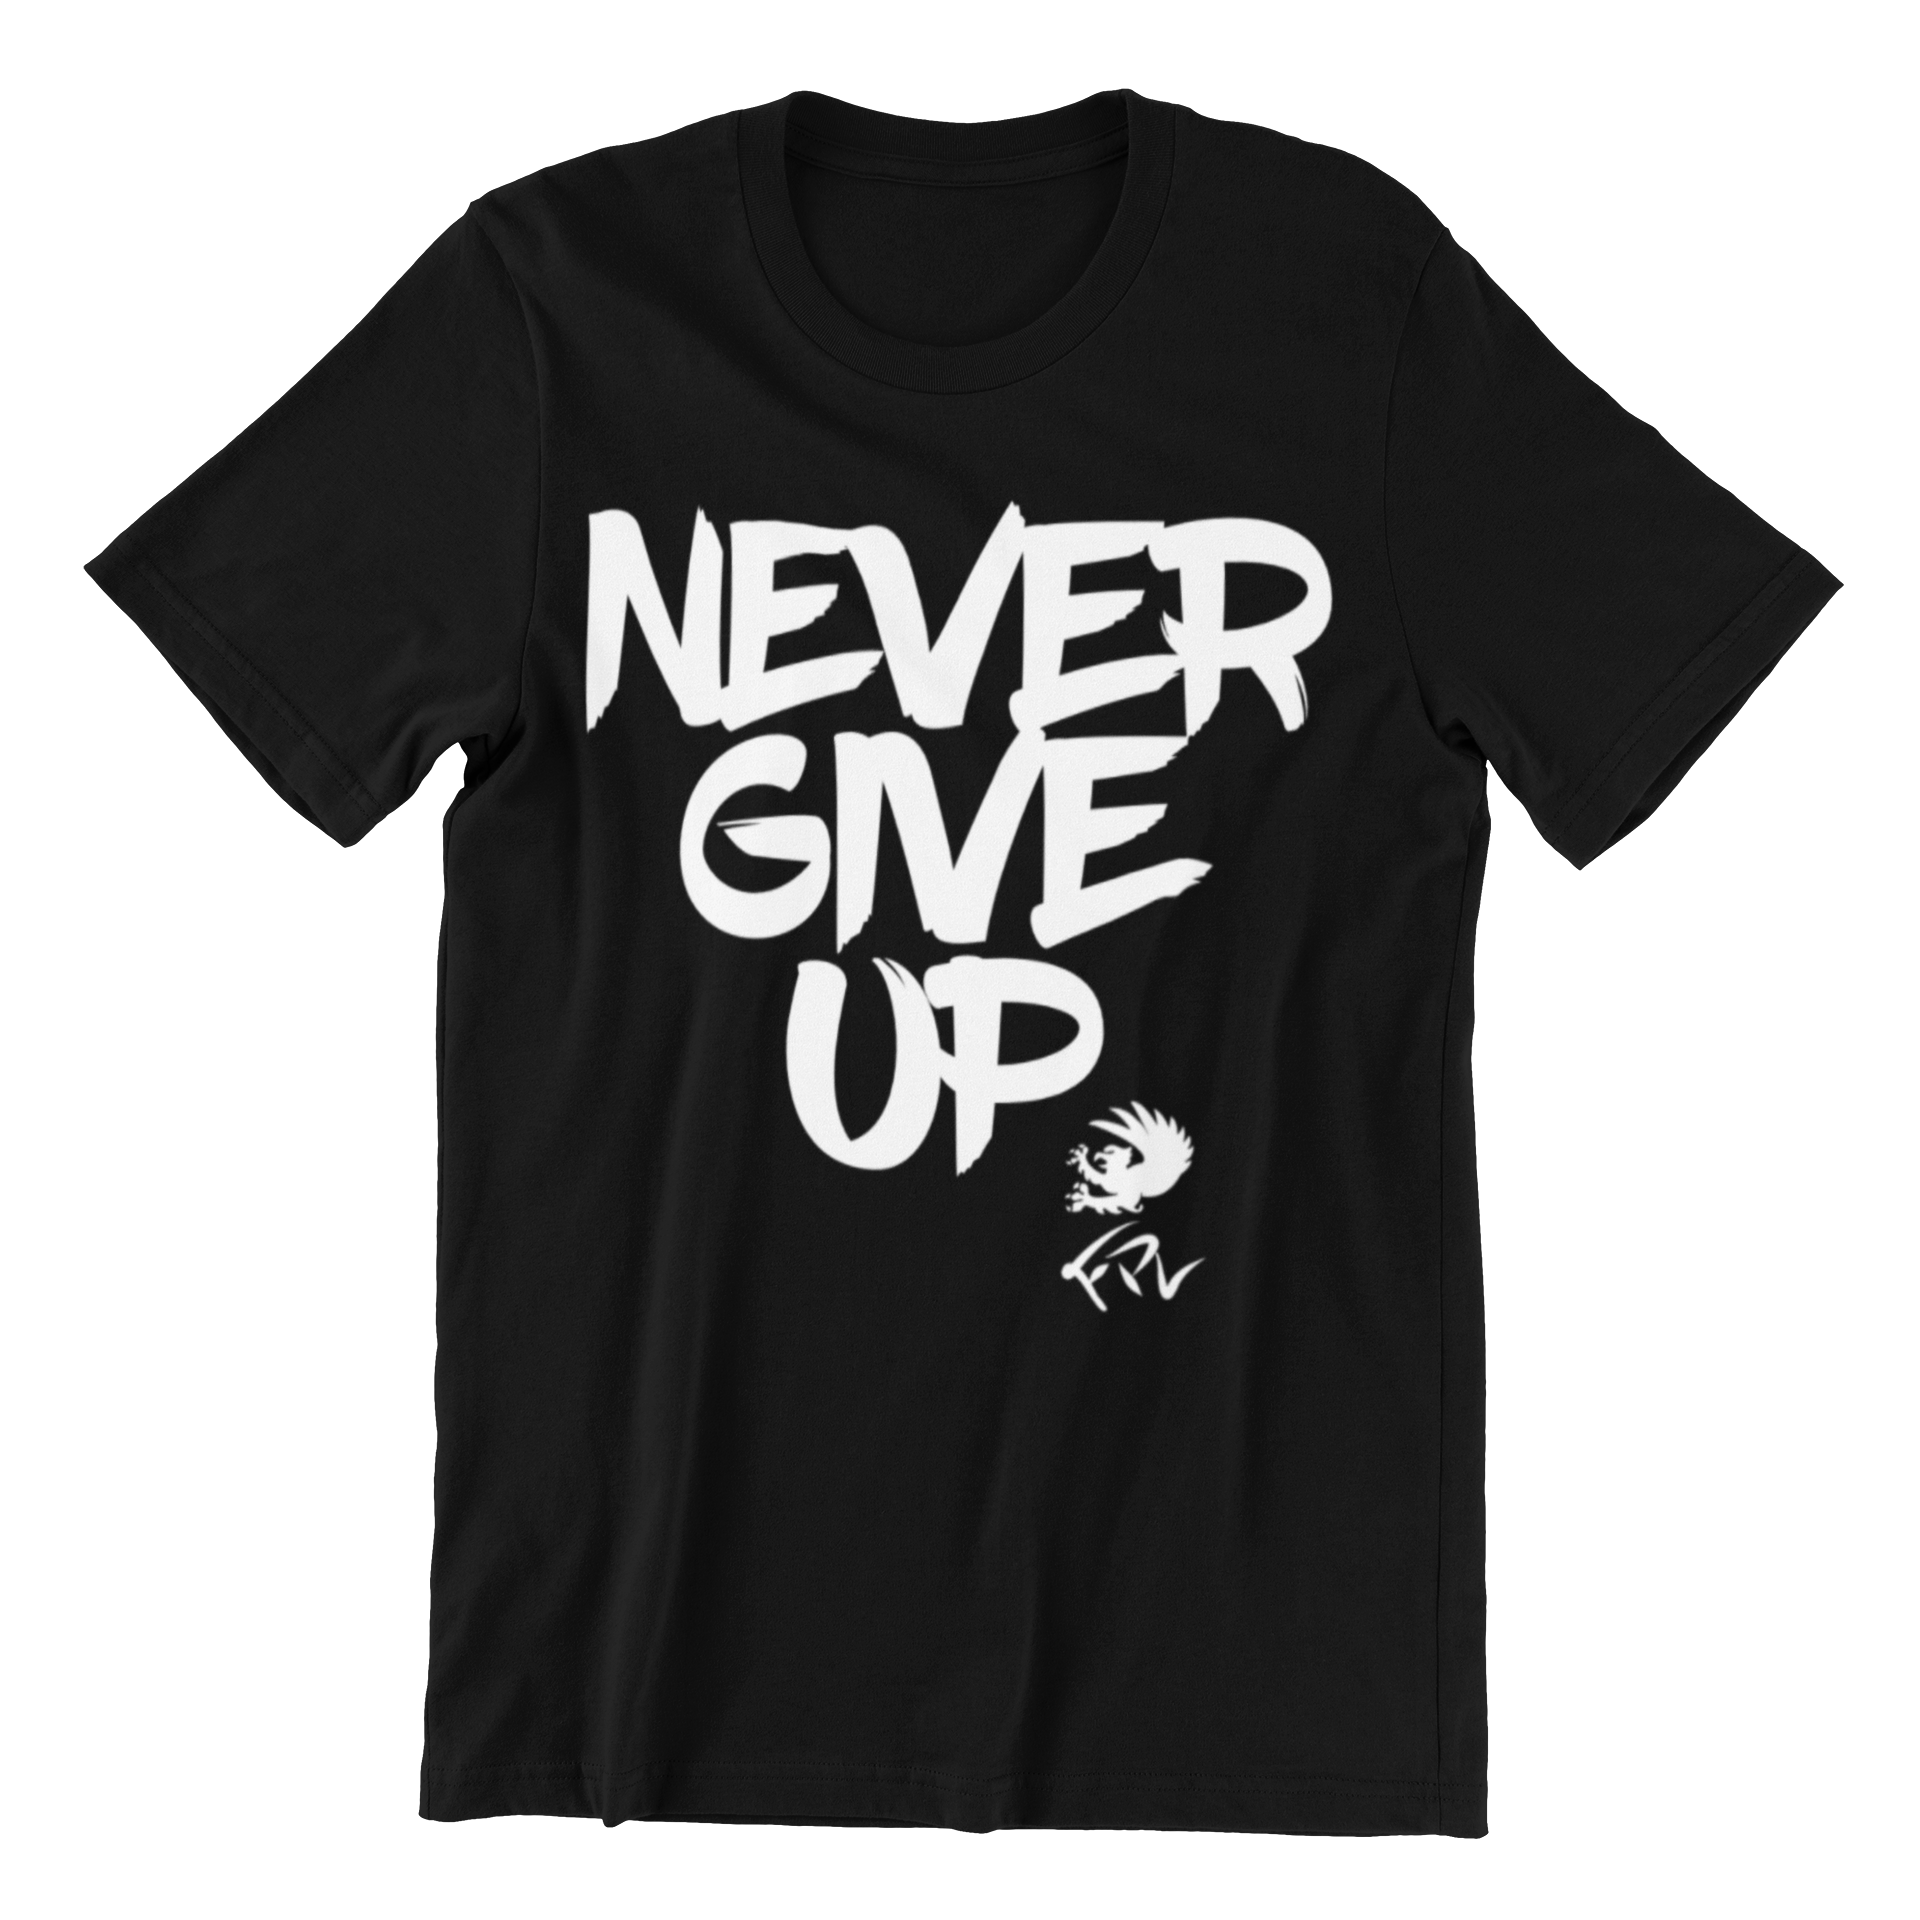 Never Give Up T-Shirt – First Place Logic